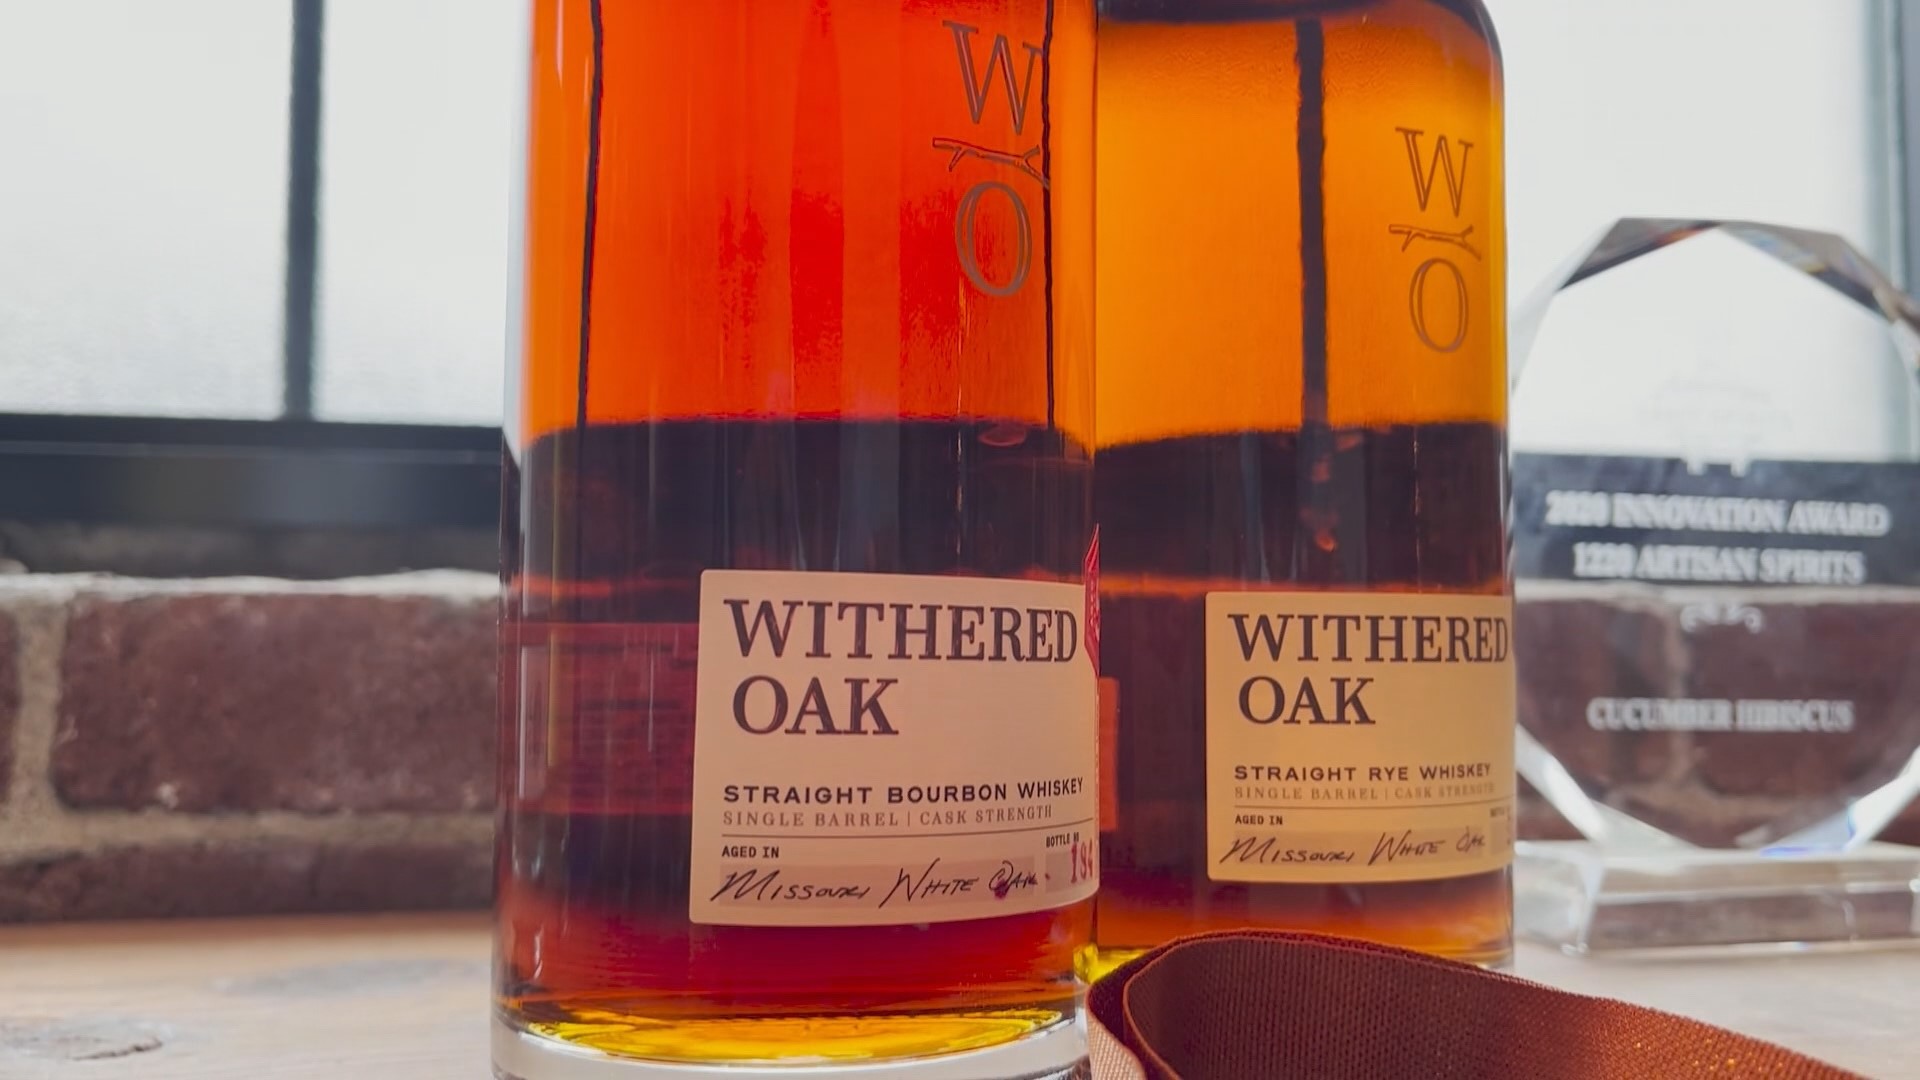 4 Hands Brewing Co. has a new line of aged spirits called "Withered Oak." It's a collaboration four years in the making between 4 Hands and 1220 Artisan Spirits.